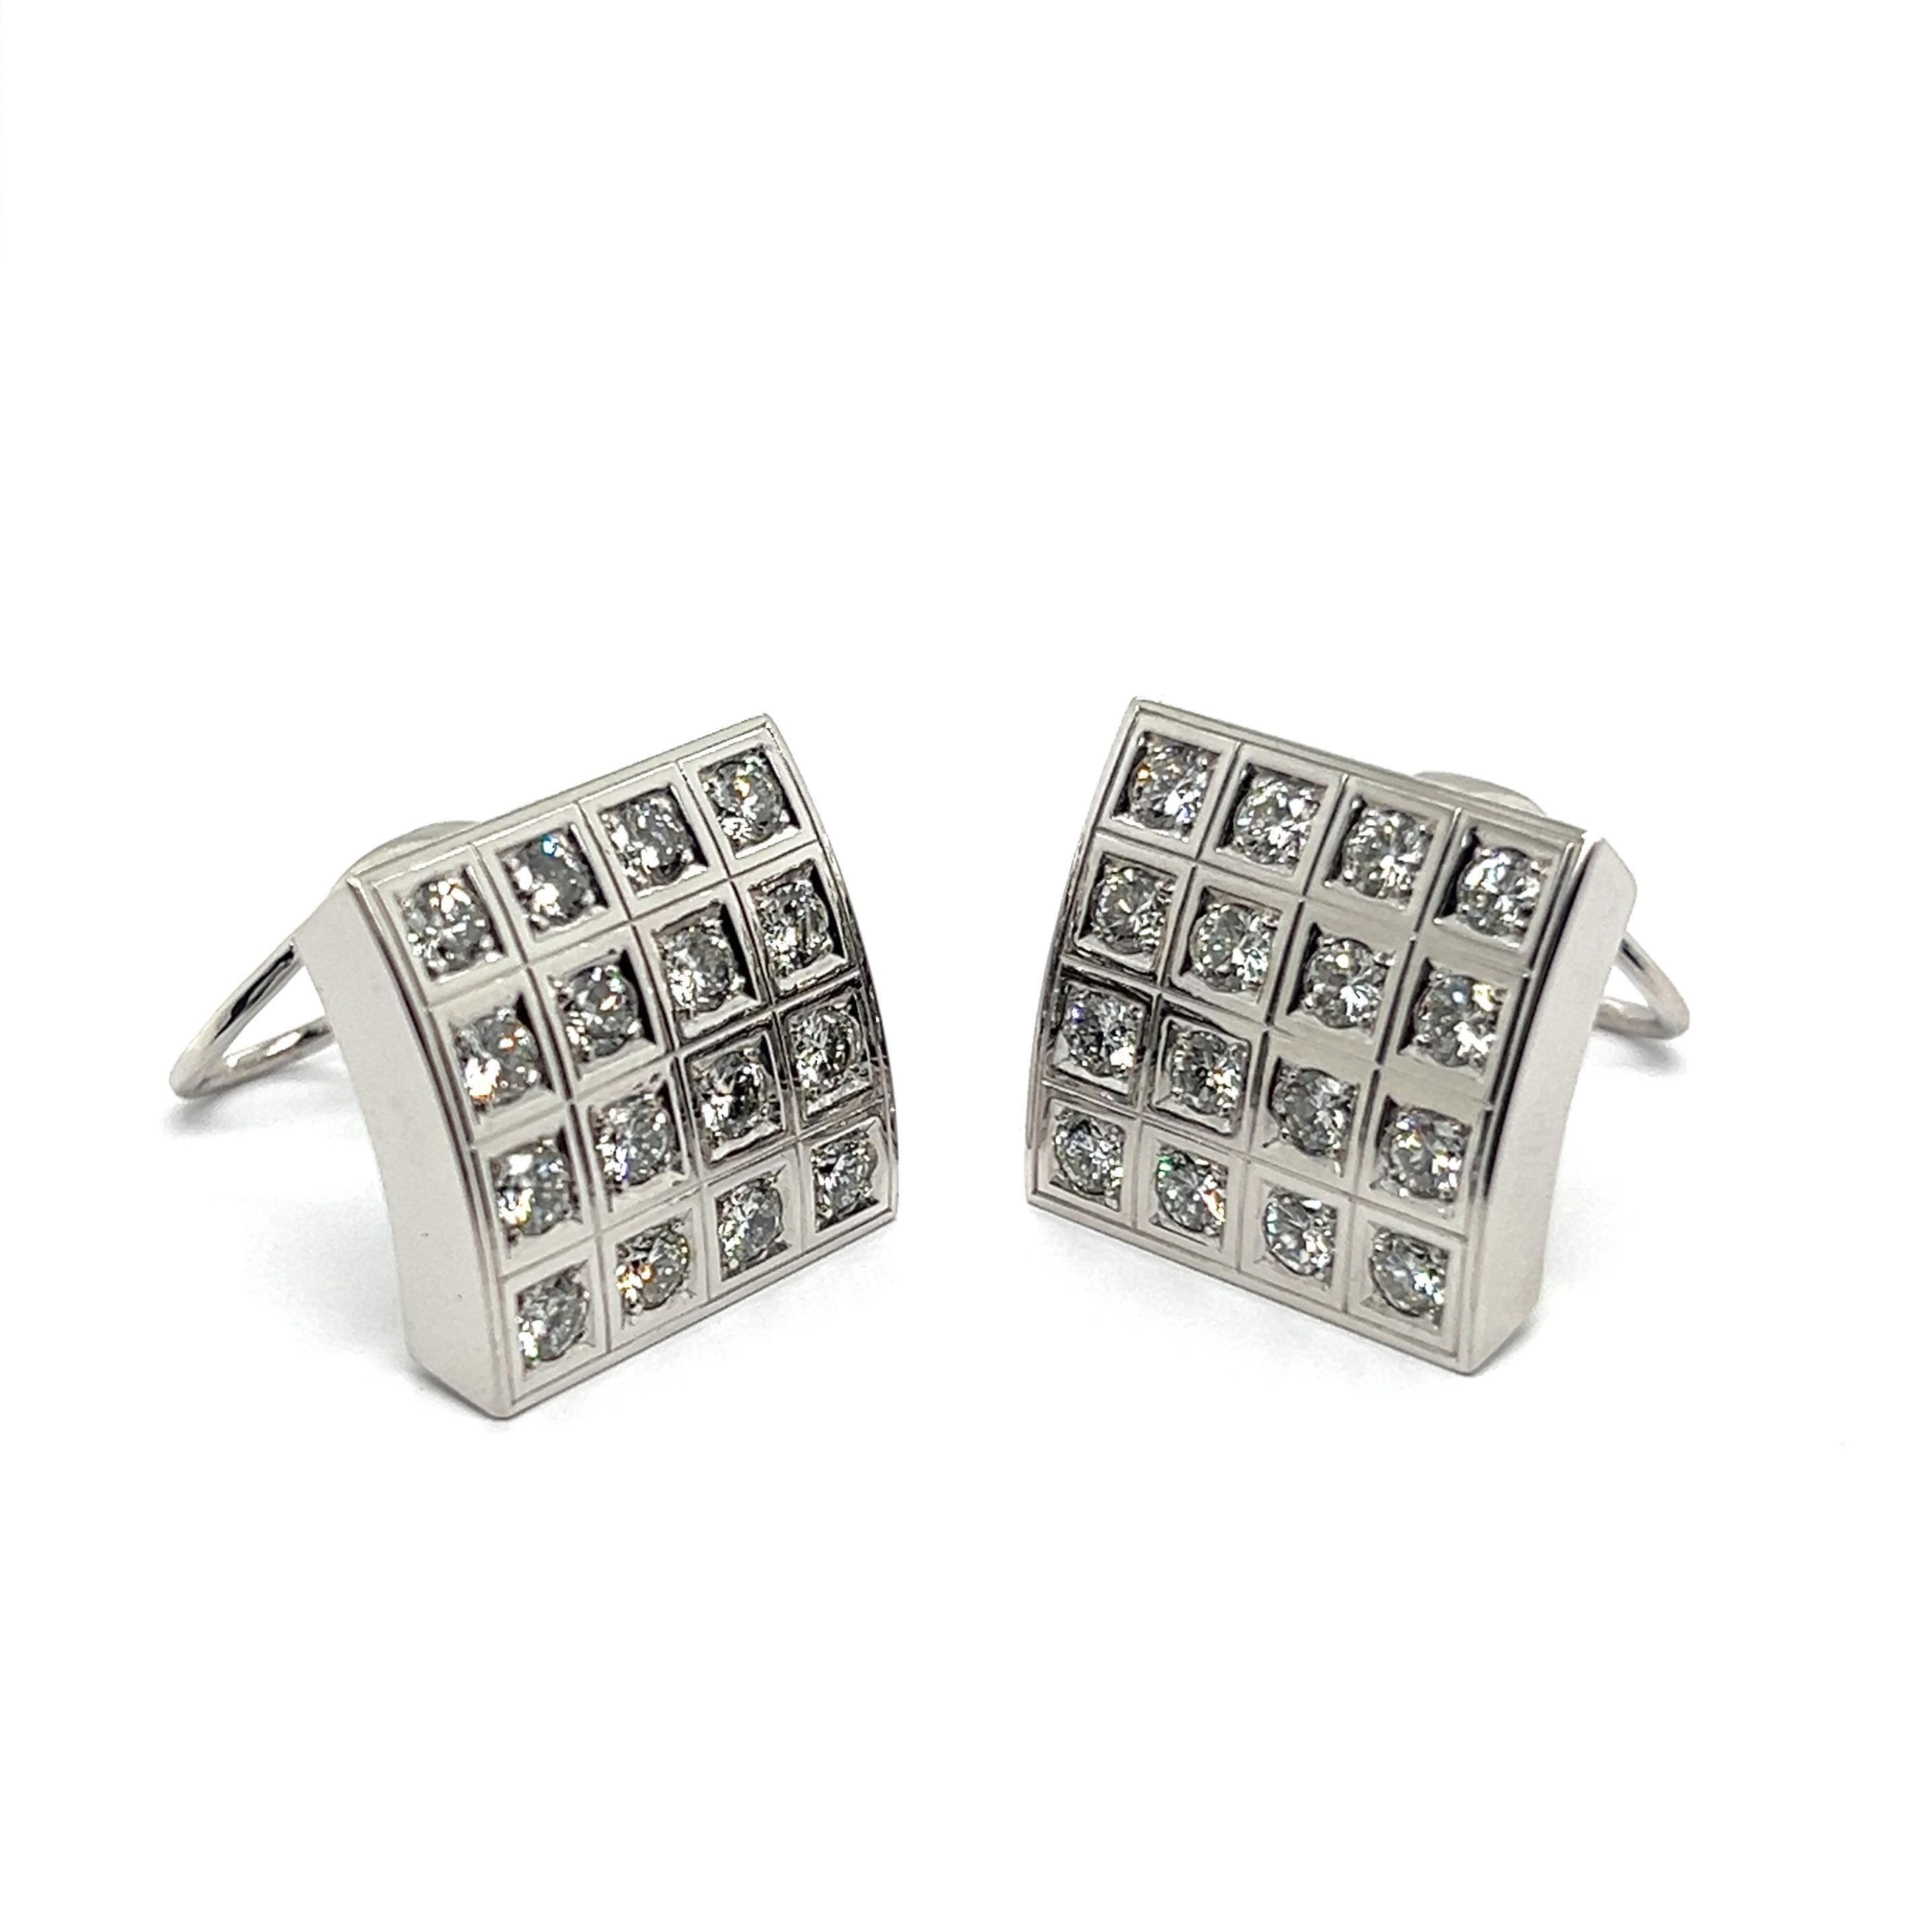  Bold Graphic Earrings with Diamonds in 18 Karat White Gold by Majo Fruithof For Sale 6